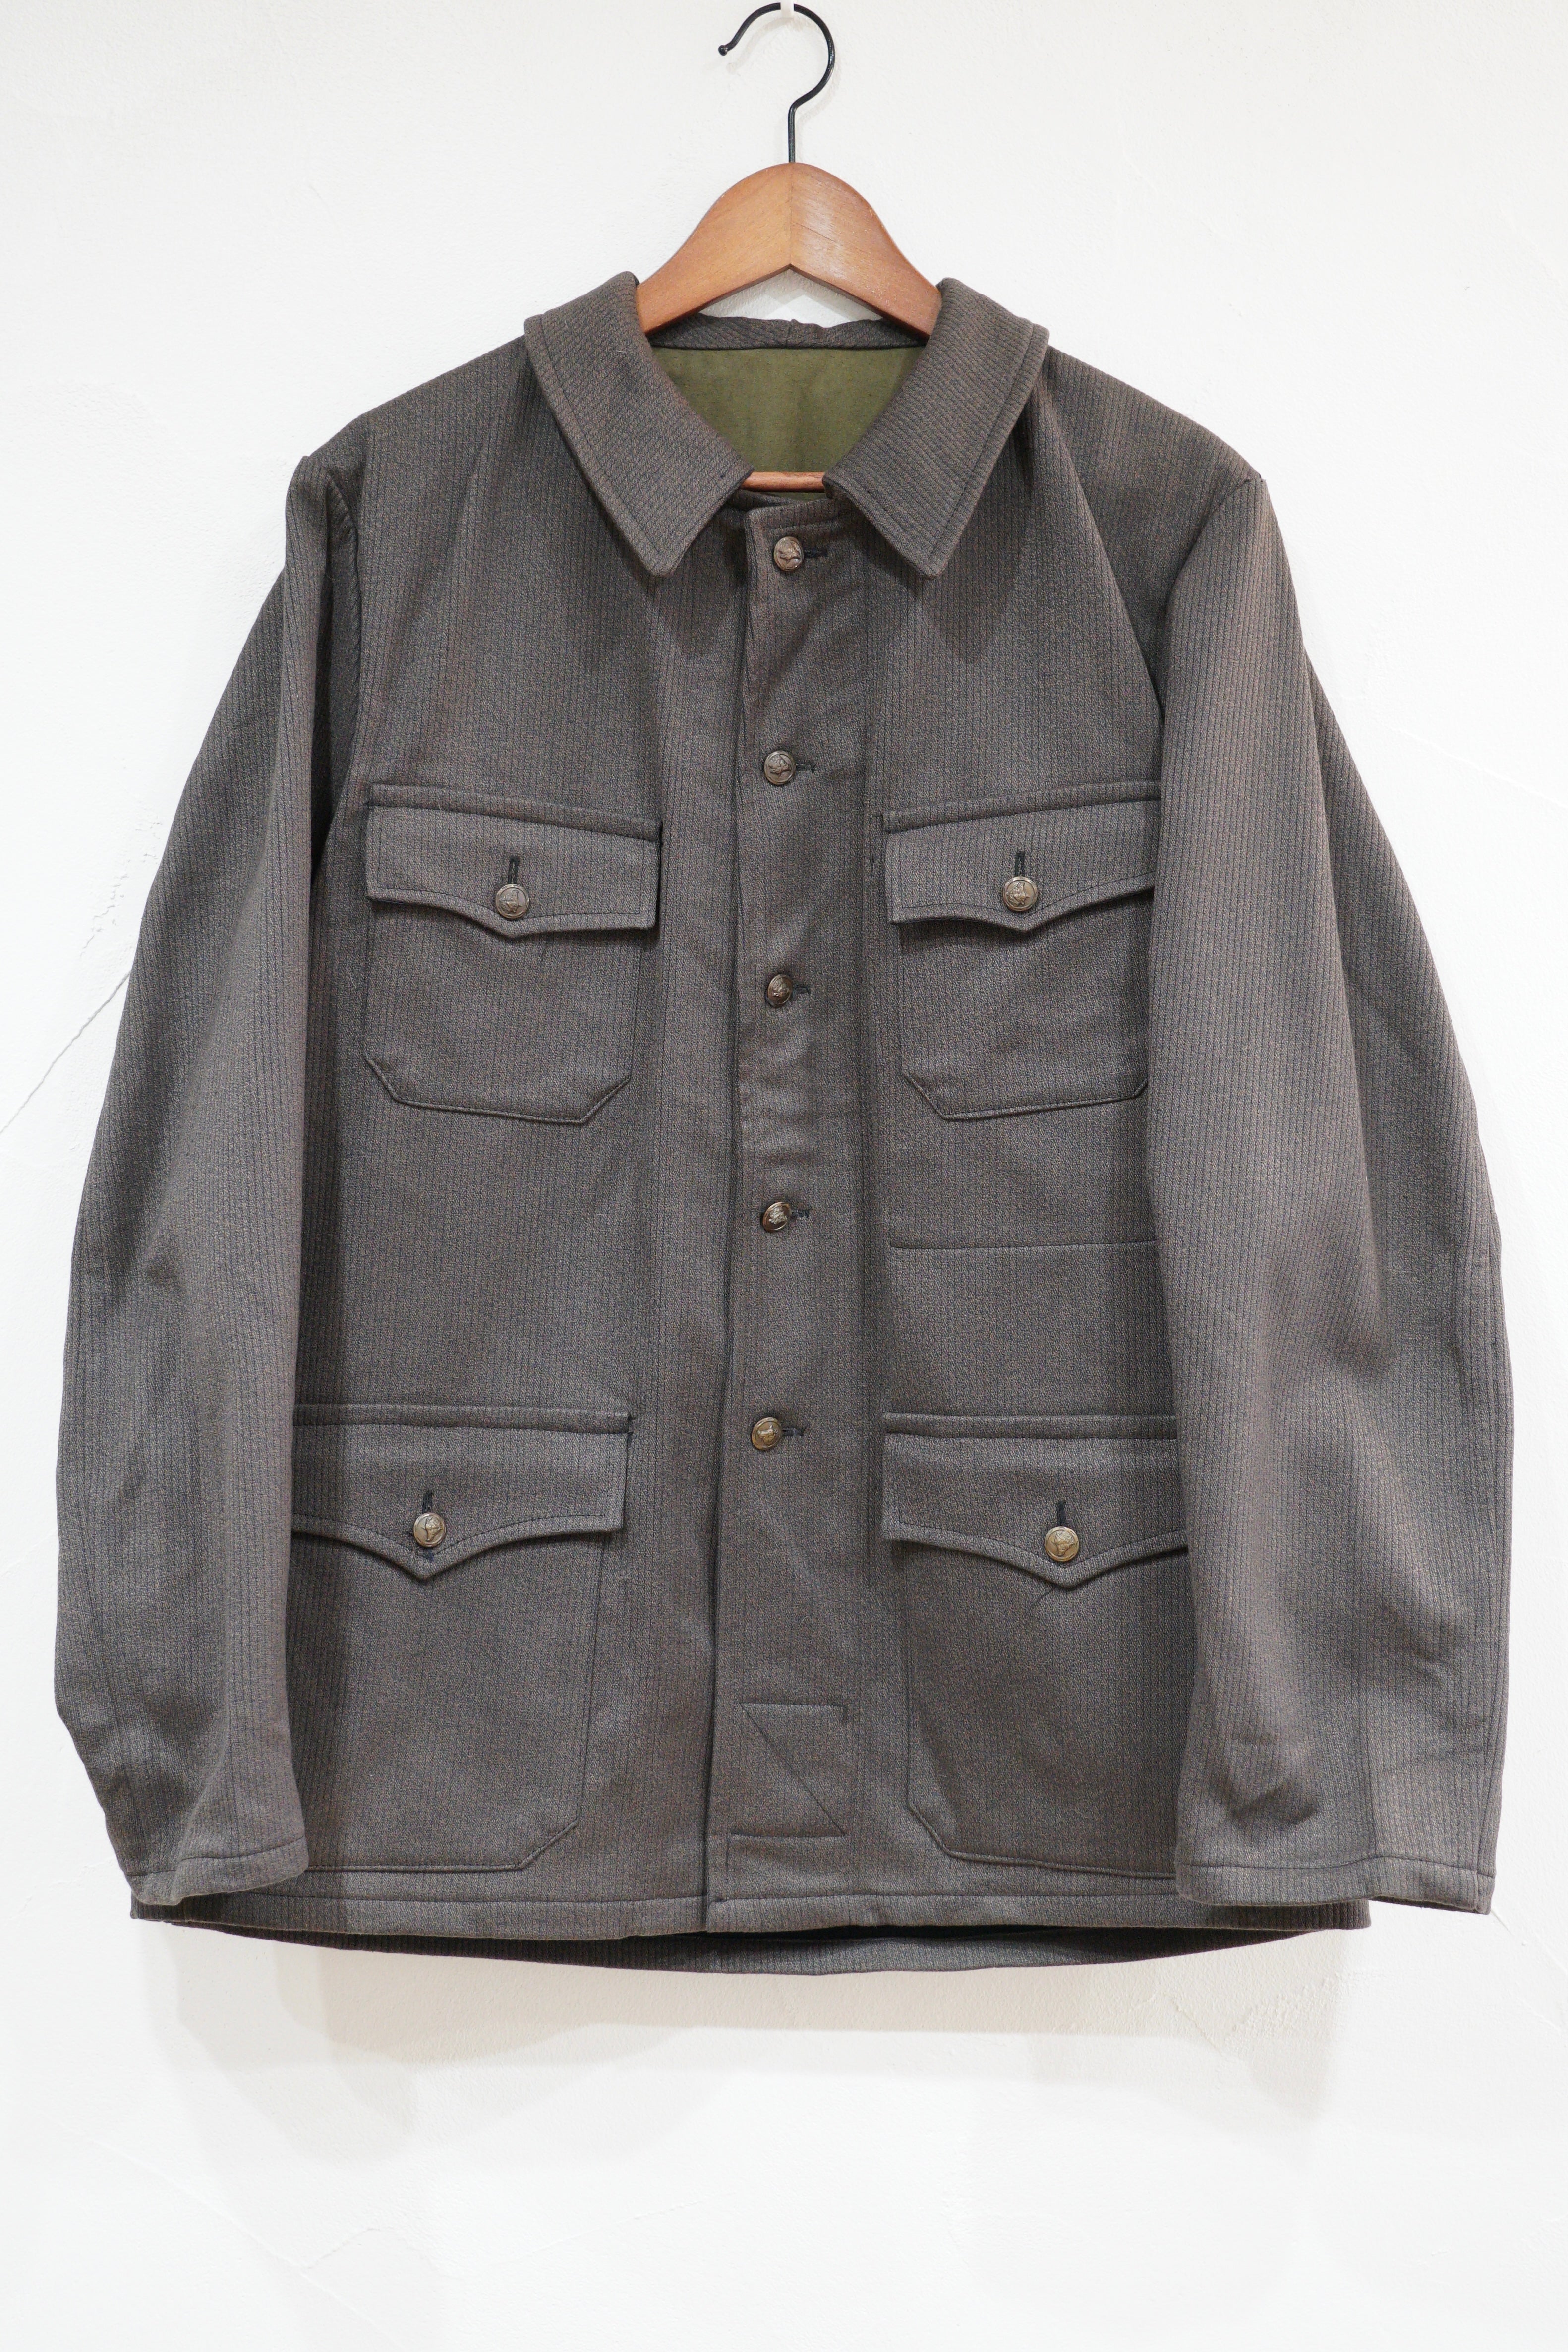 50s Hunting Jacket Cotton Pique